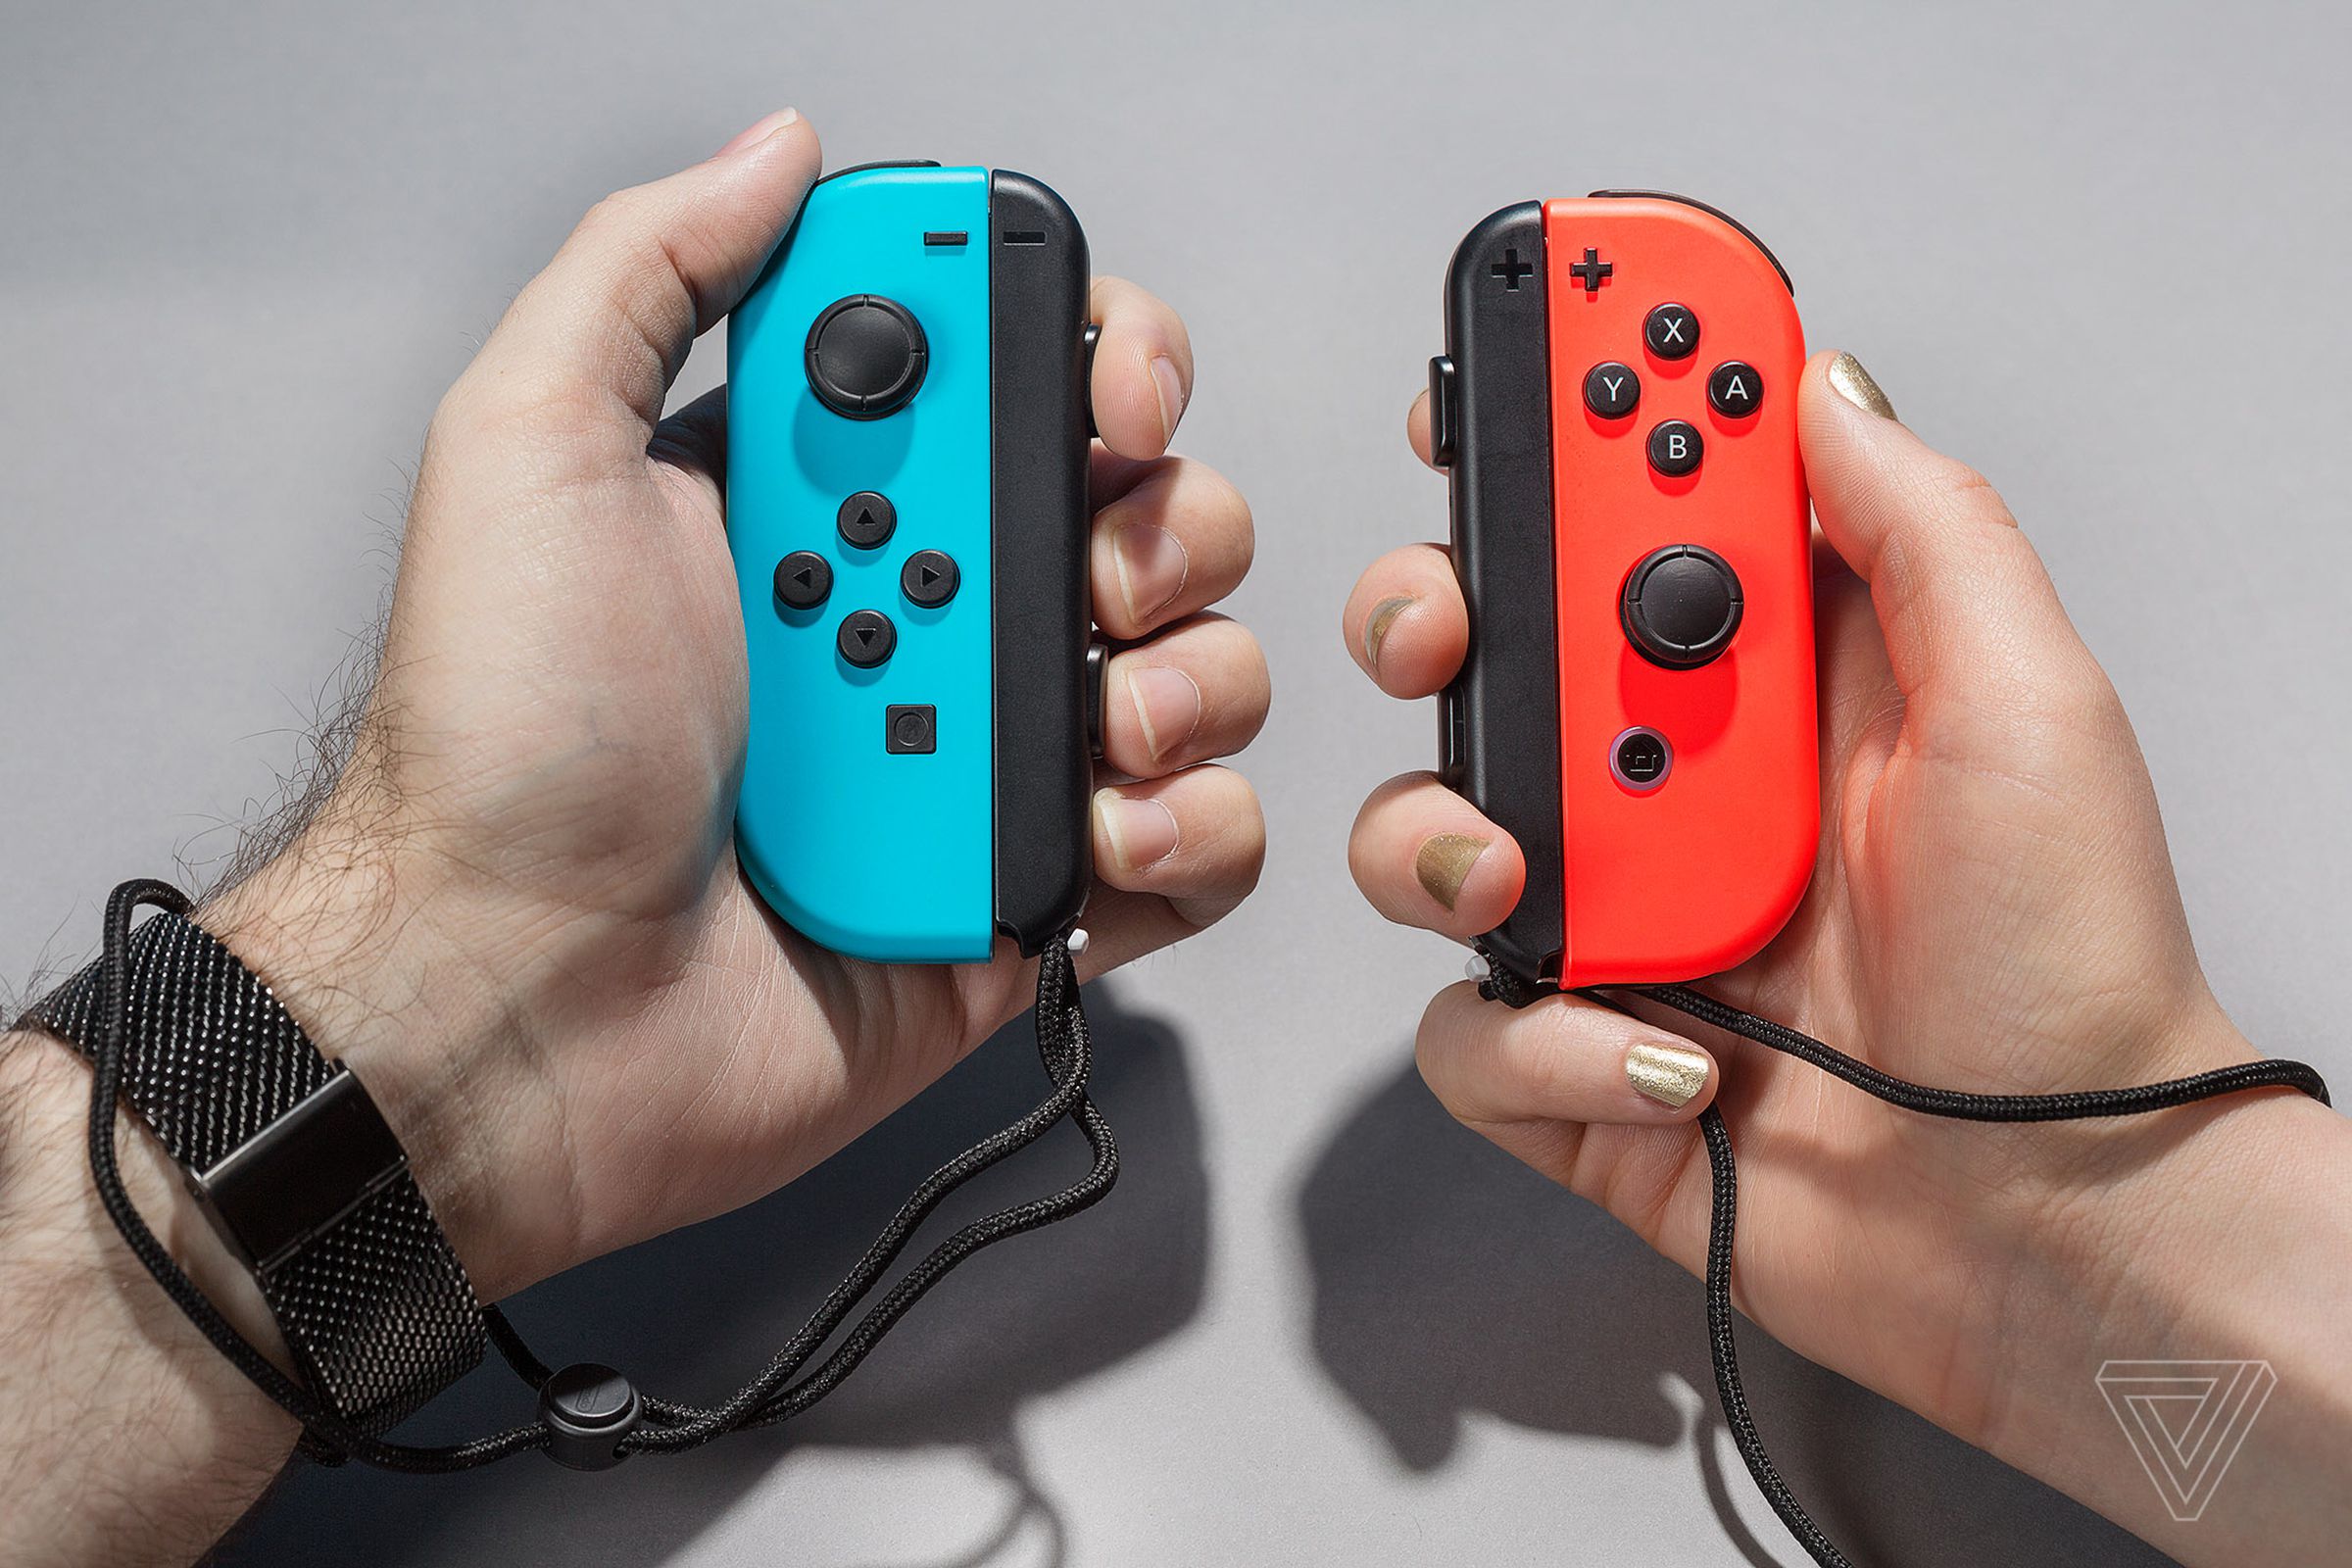 Normally these Joy-Cons would be about $40 a piece at their full price of $79.99.